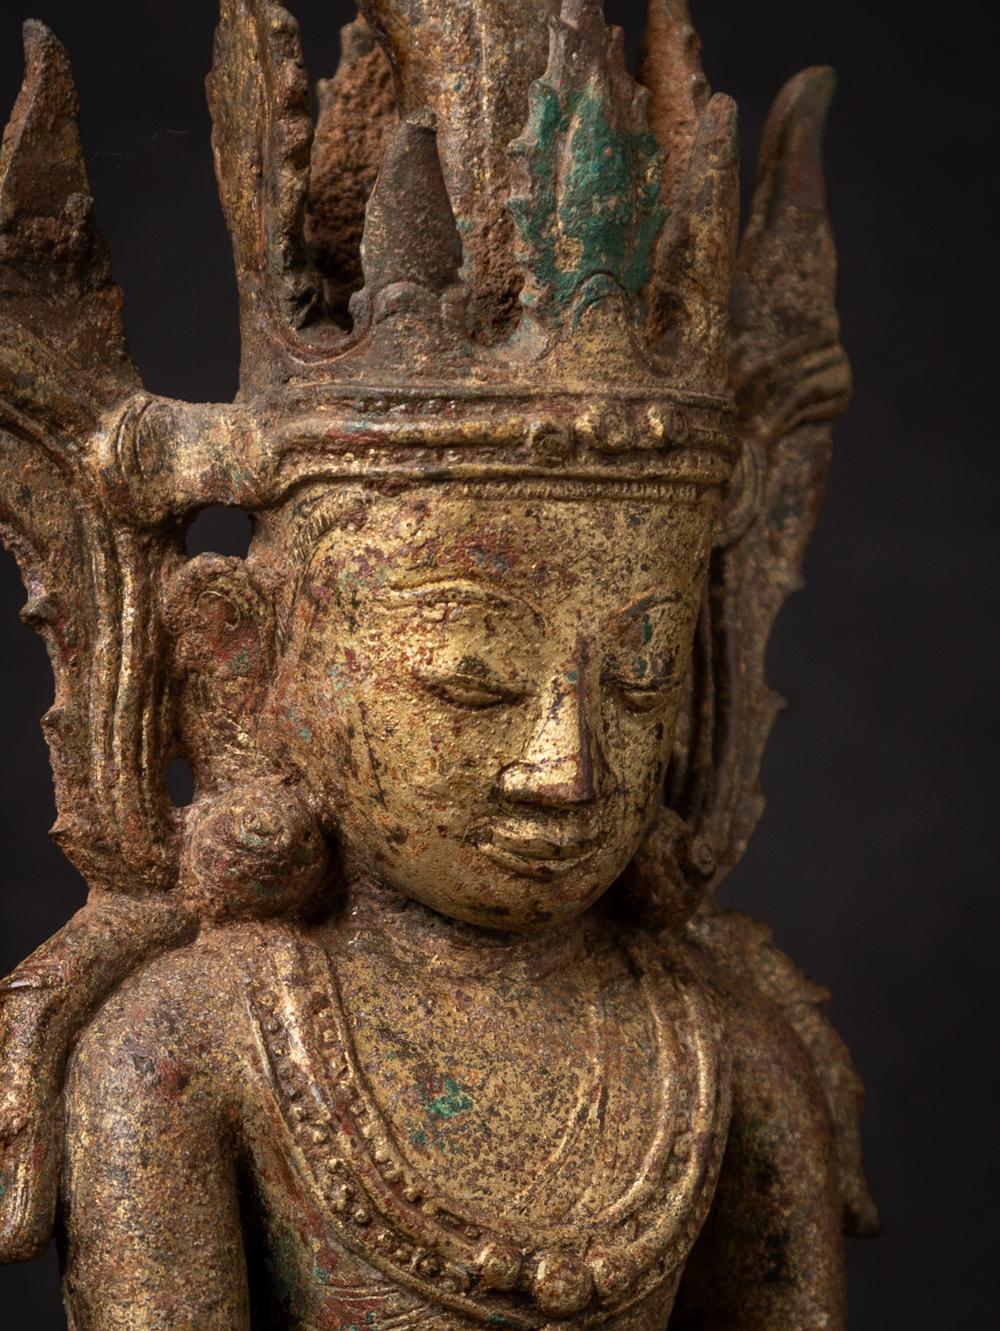 Material: bronze
32,6 cm high 
16 cm wide and 9 cm deep
Weight: 2.757 kgs
With traces of 24 krt. gilding
Ava style
Bhumisparsha mudra
Originating from Burma
15th century, early Ava period
A very special bronze Buddha with one of the best expressions